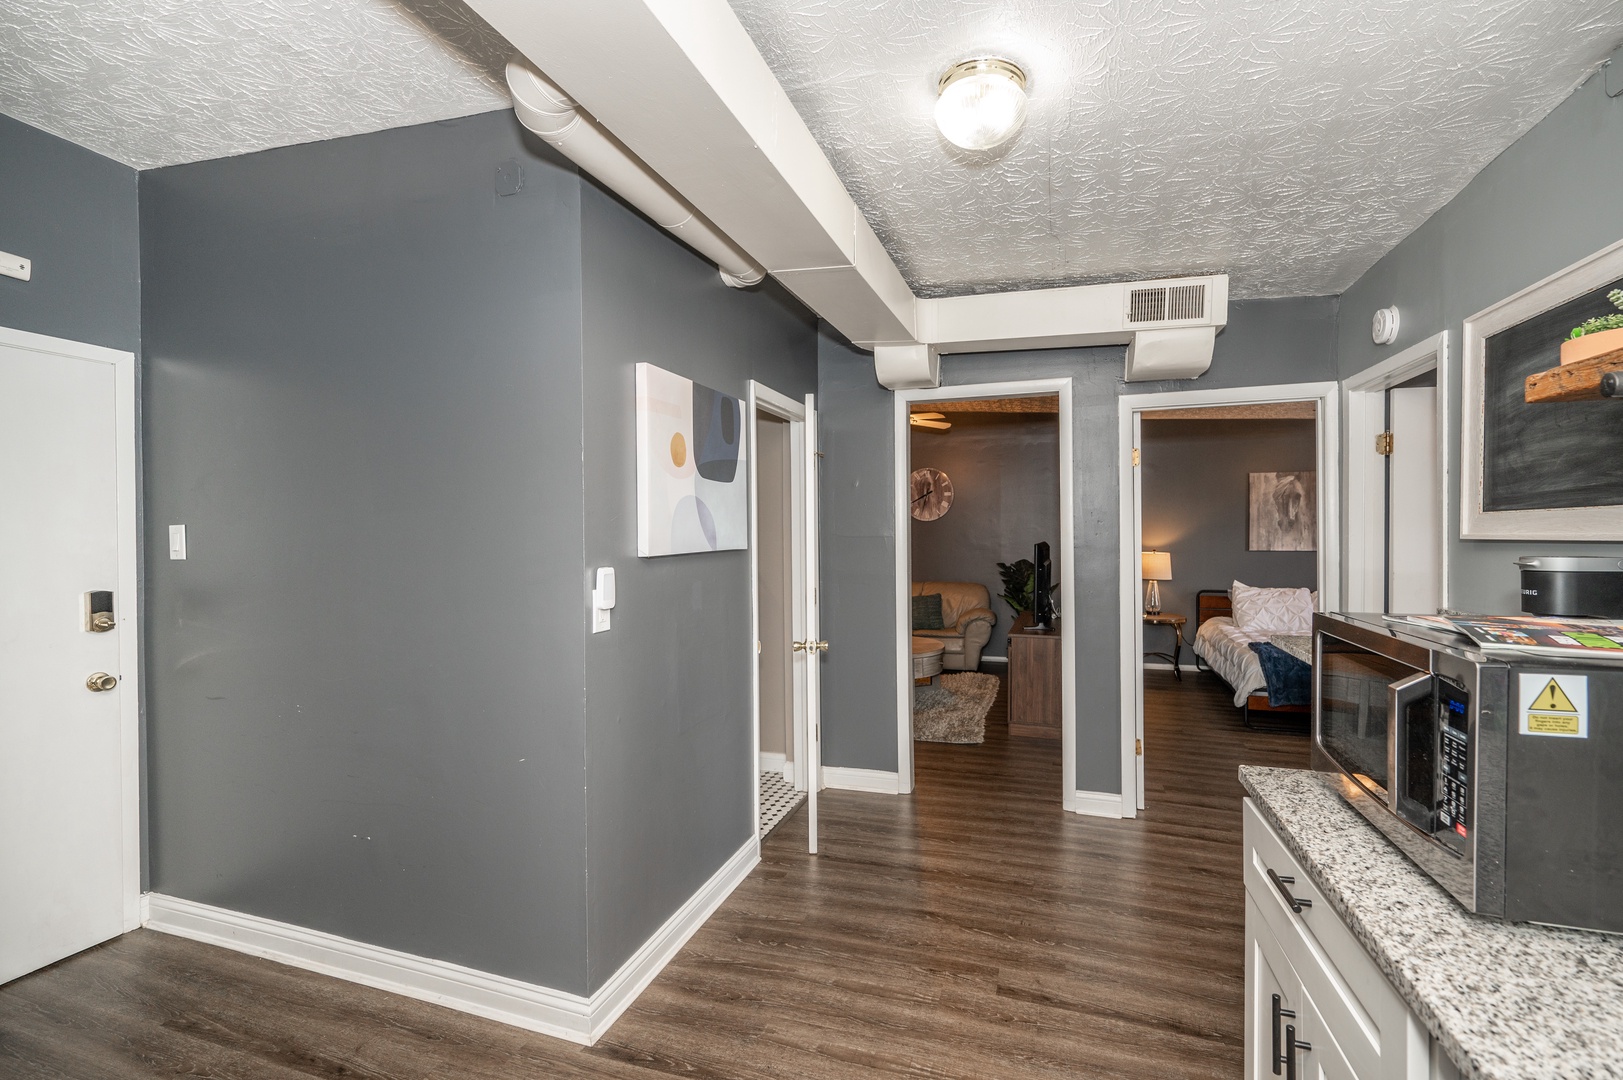 Enter this 3rd floor condo and find yourself in the well-equipped kitchenette